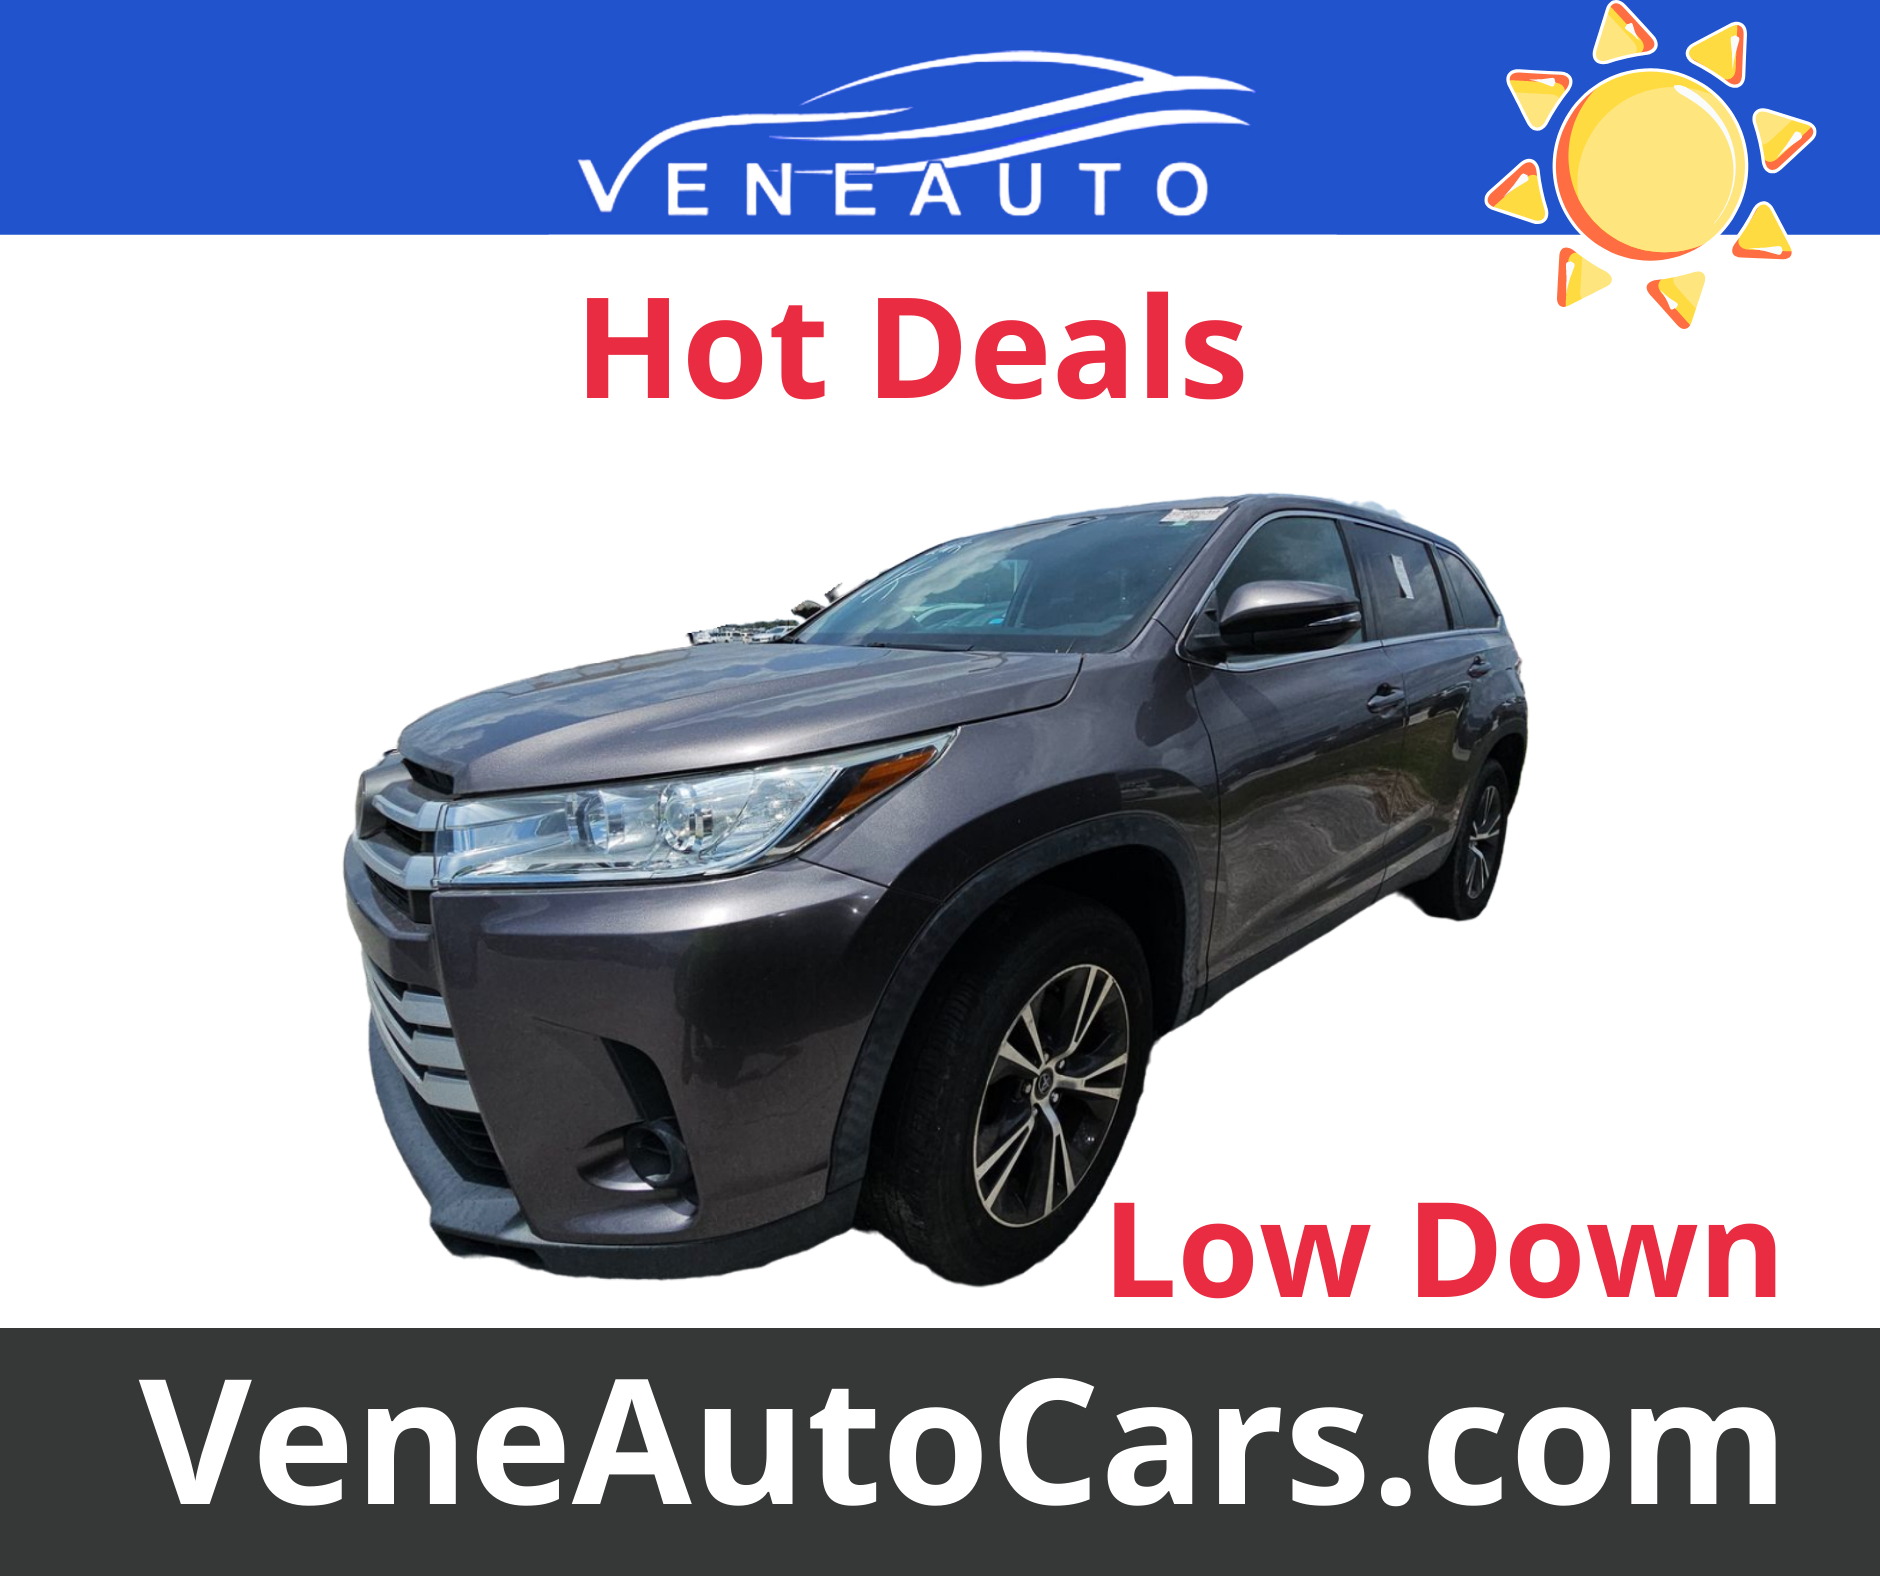 2019 Toyota Highlander for sale in Gainesville FL 32609 by Veneauto Cars